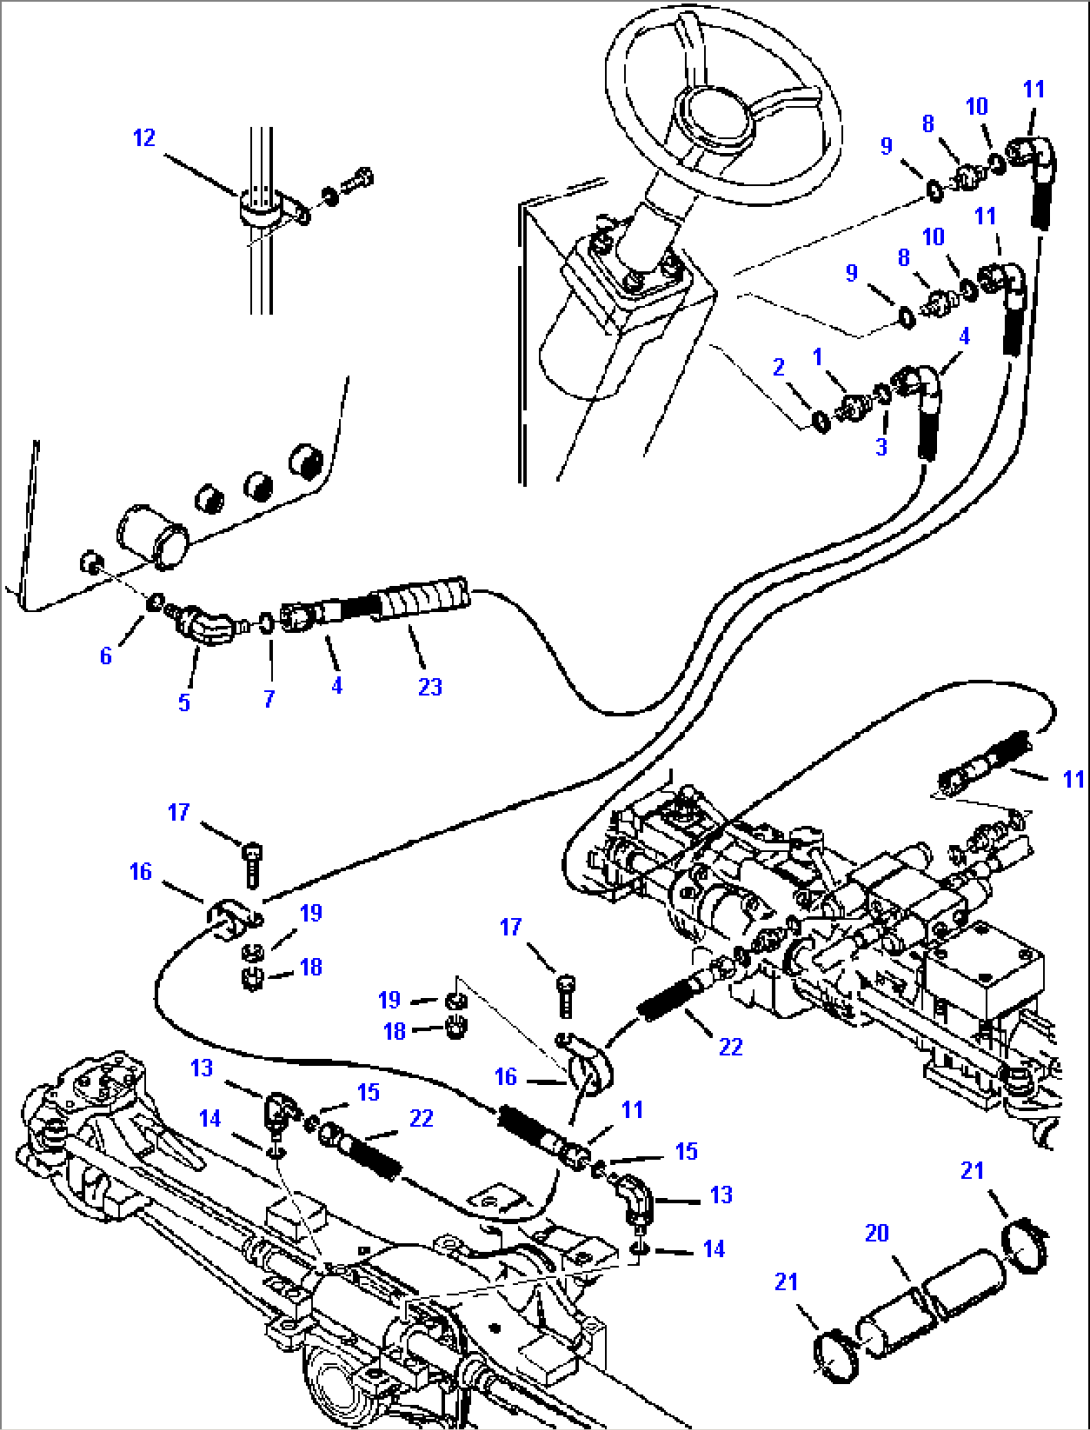 FIG. H6500-01A6 HYDRAULIC PIPING - FRONT STEERING LINES